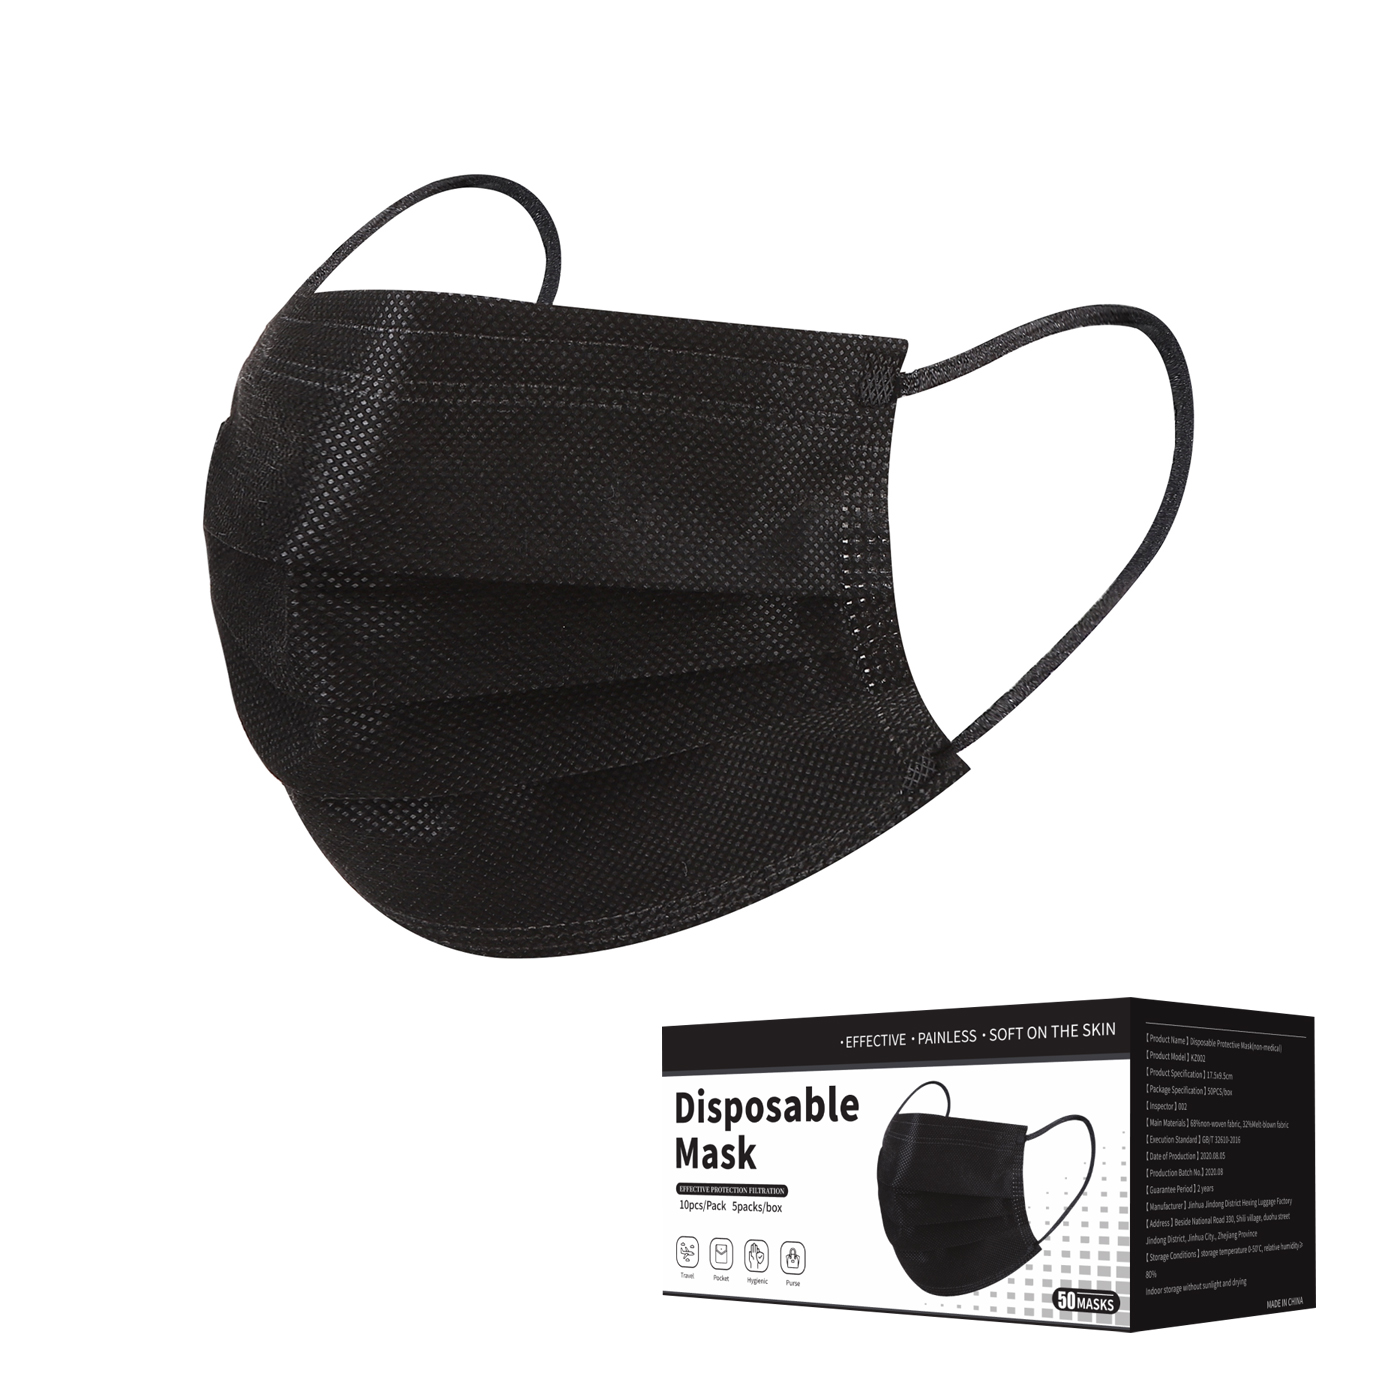 Inventory in USA! Disposable 3-ply mask Black mask